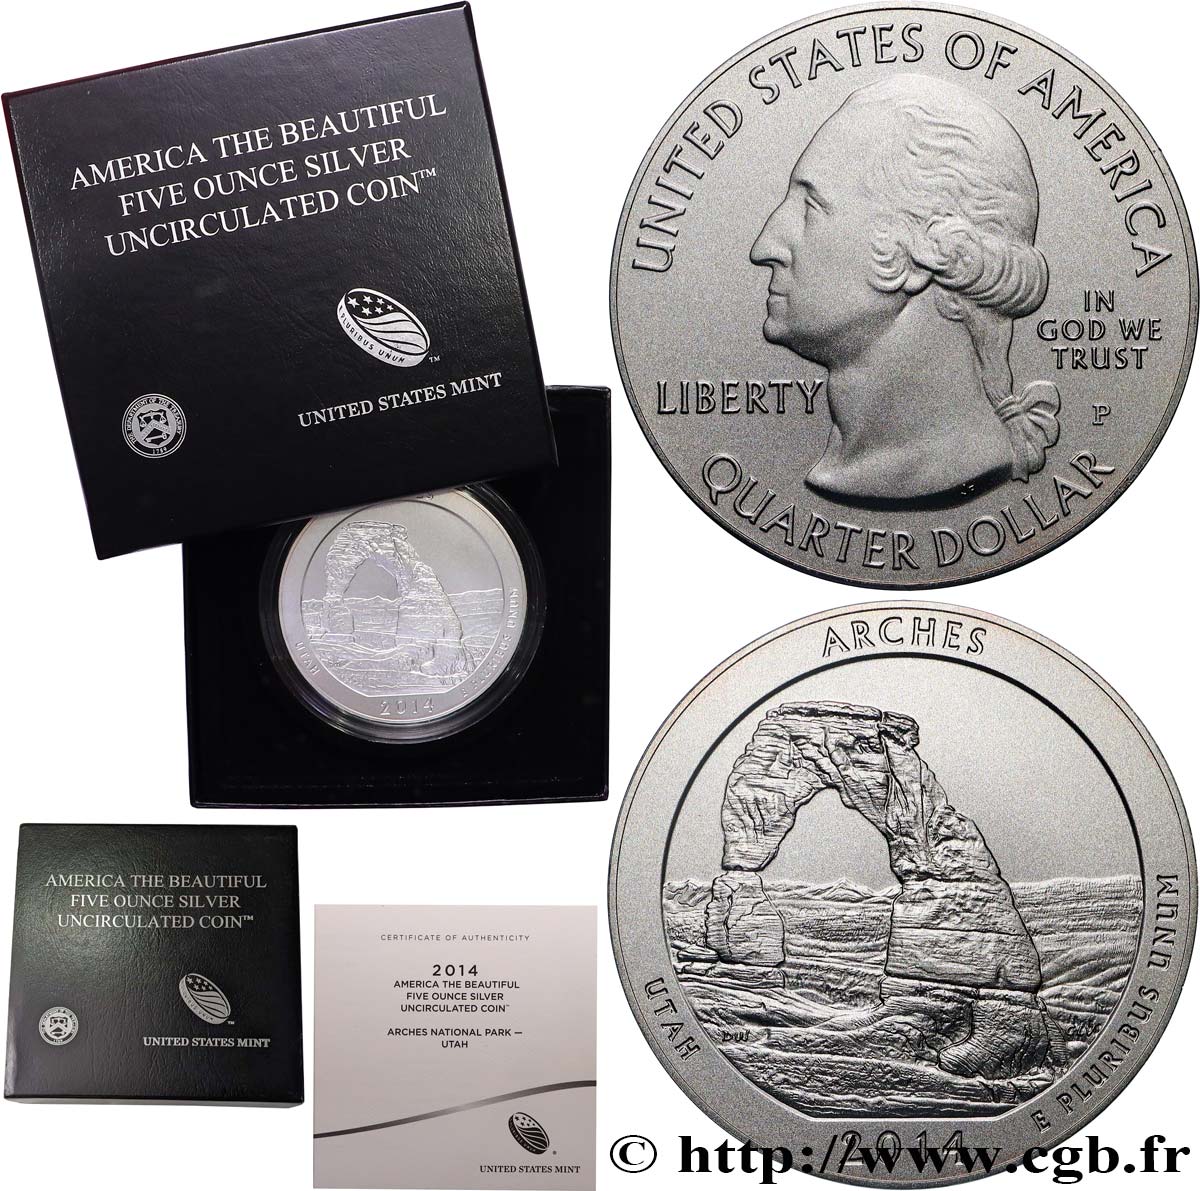 UNITED STATES OF AMERICA 25 cent - 5 onces d’argent FDC - ARCHES - Utah 2014 Philadelphie MS 